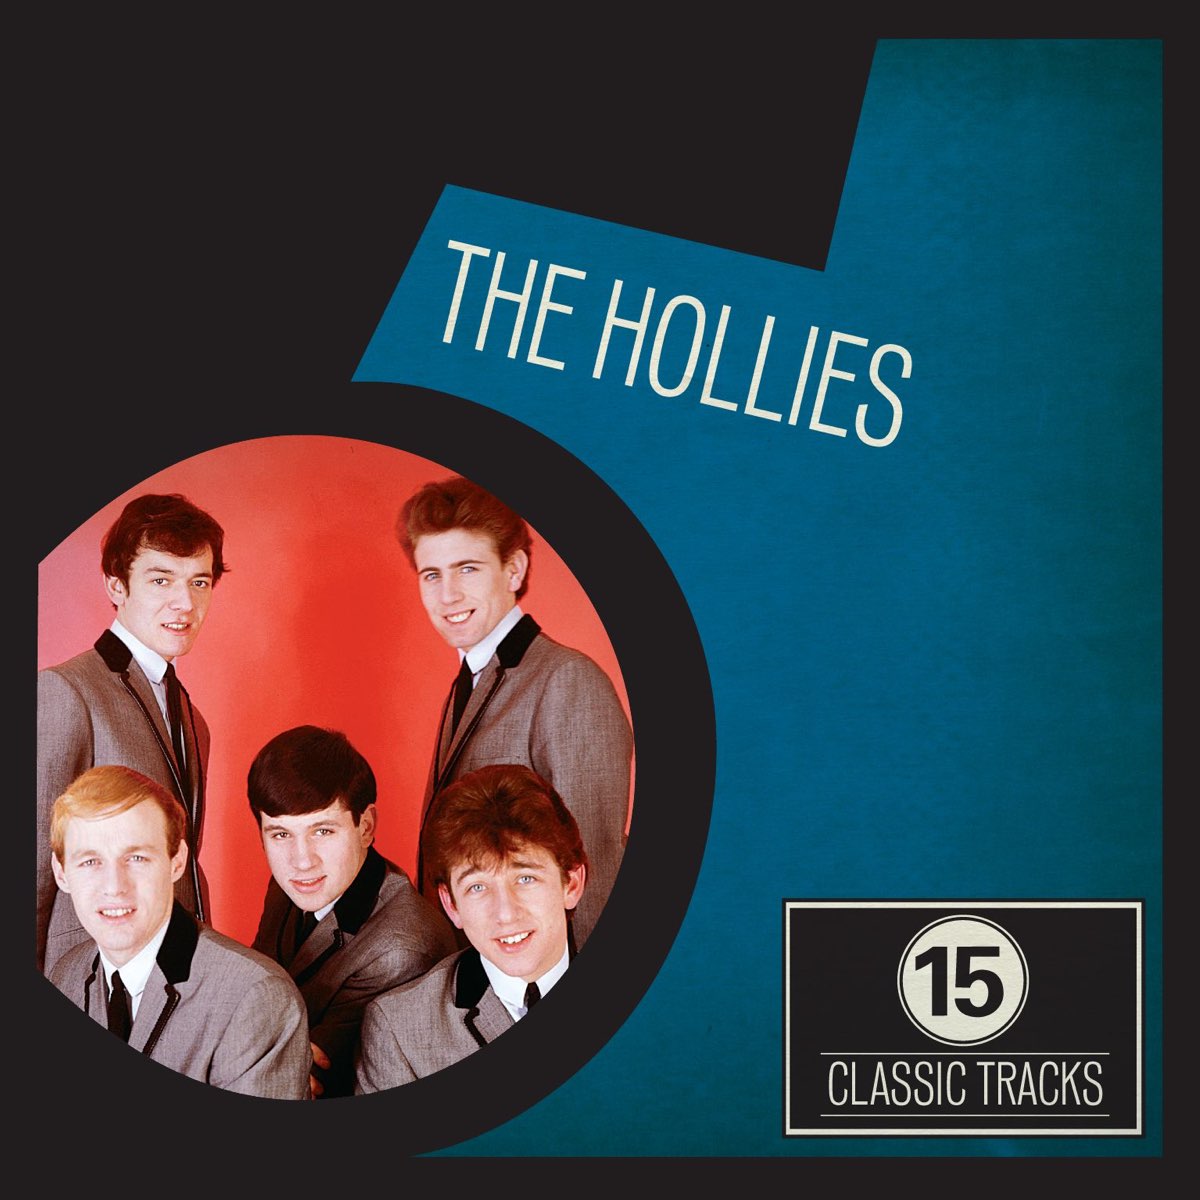 ‎15 Classic Tracks The Hollies By The Hollies On Apple Music